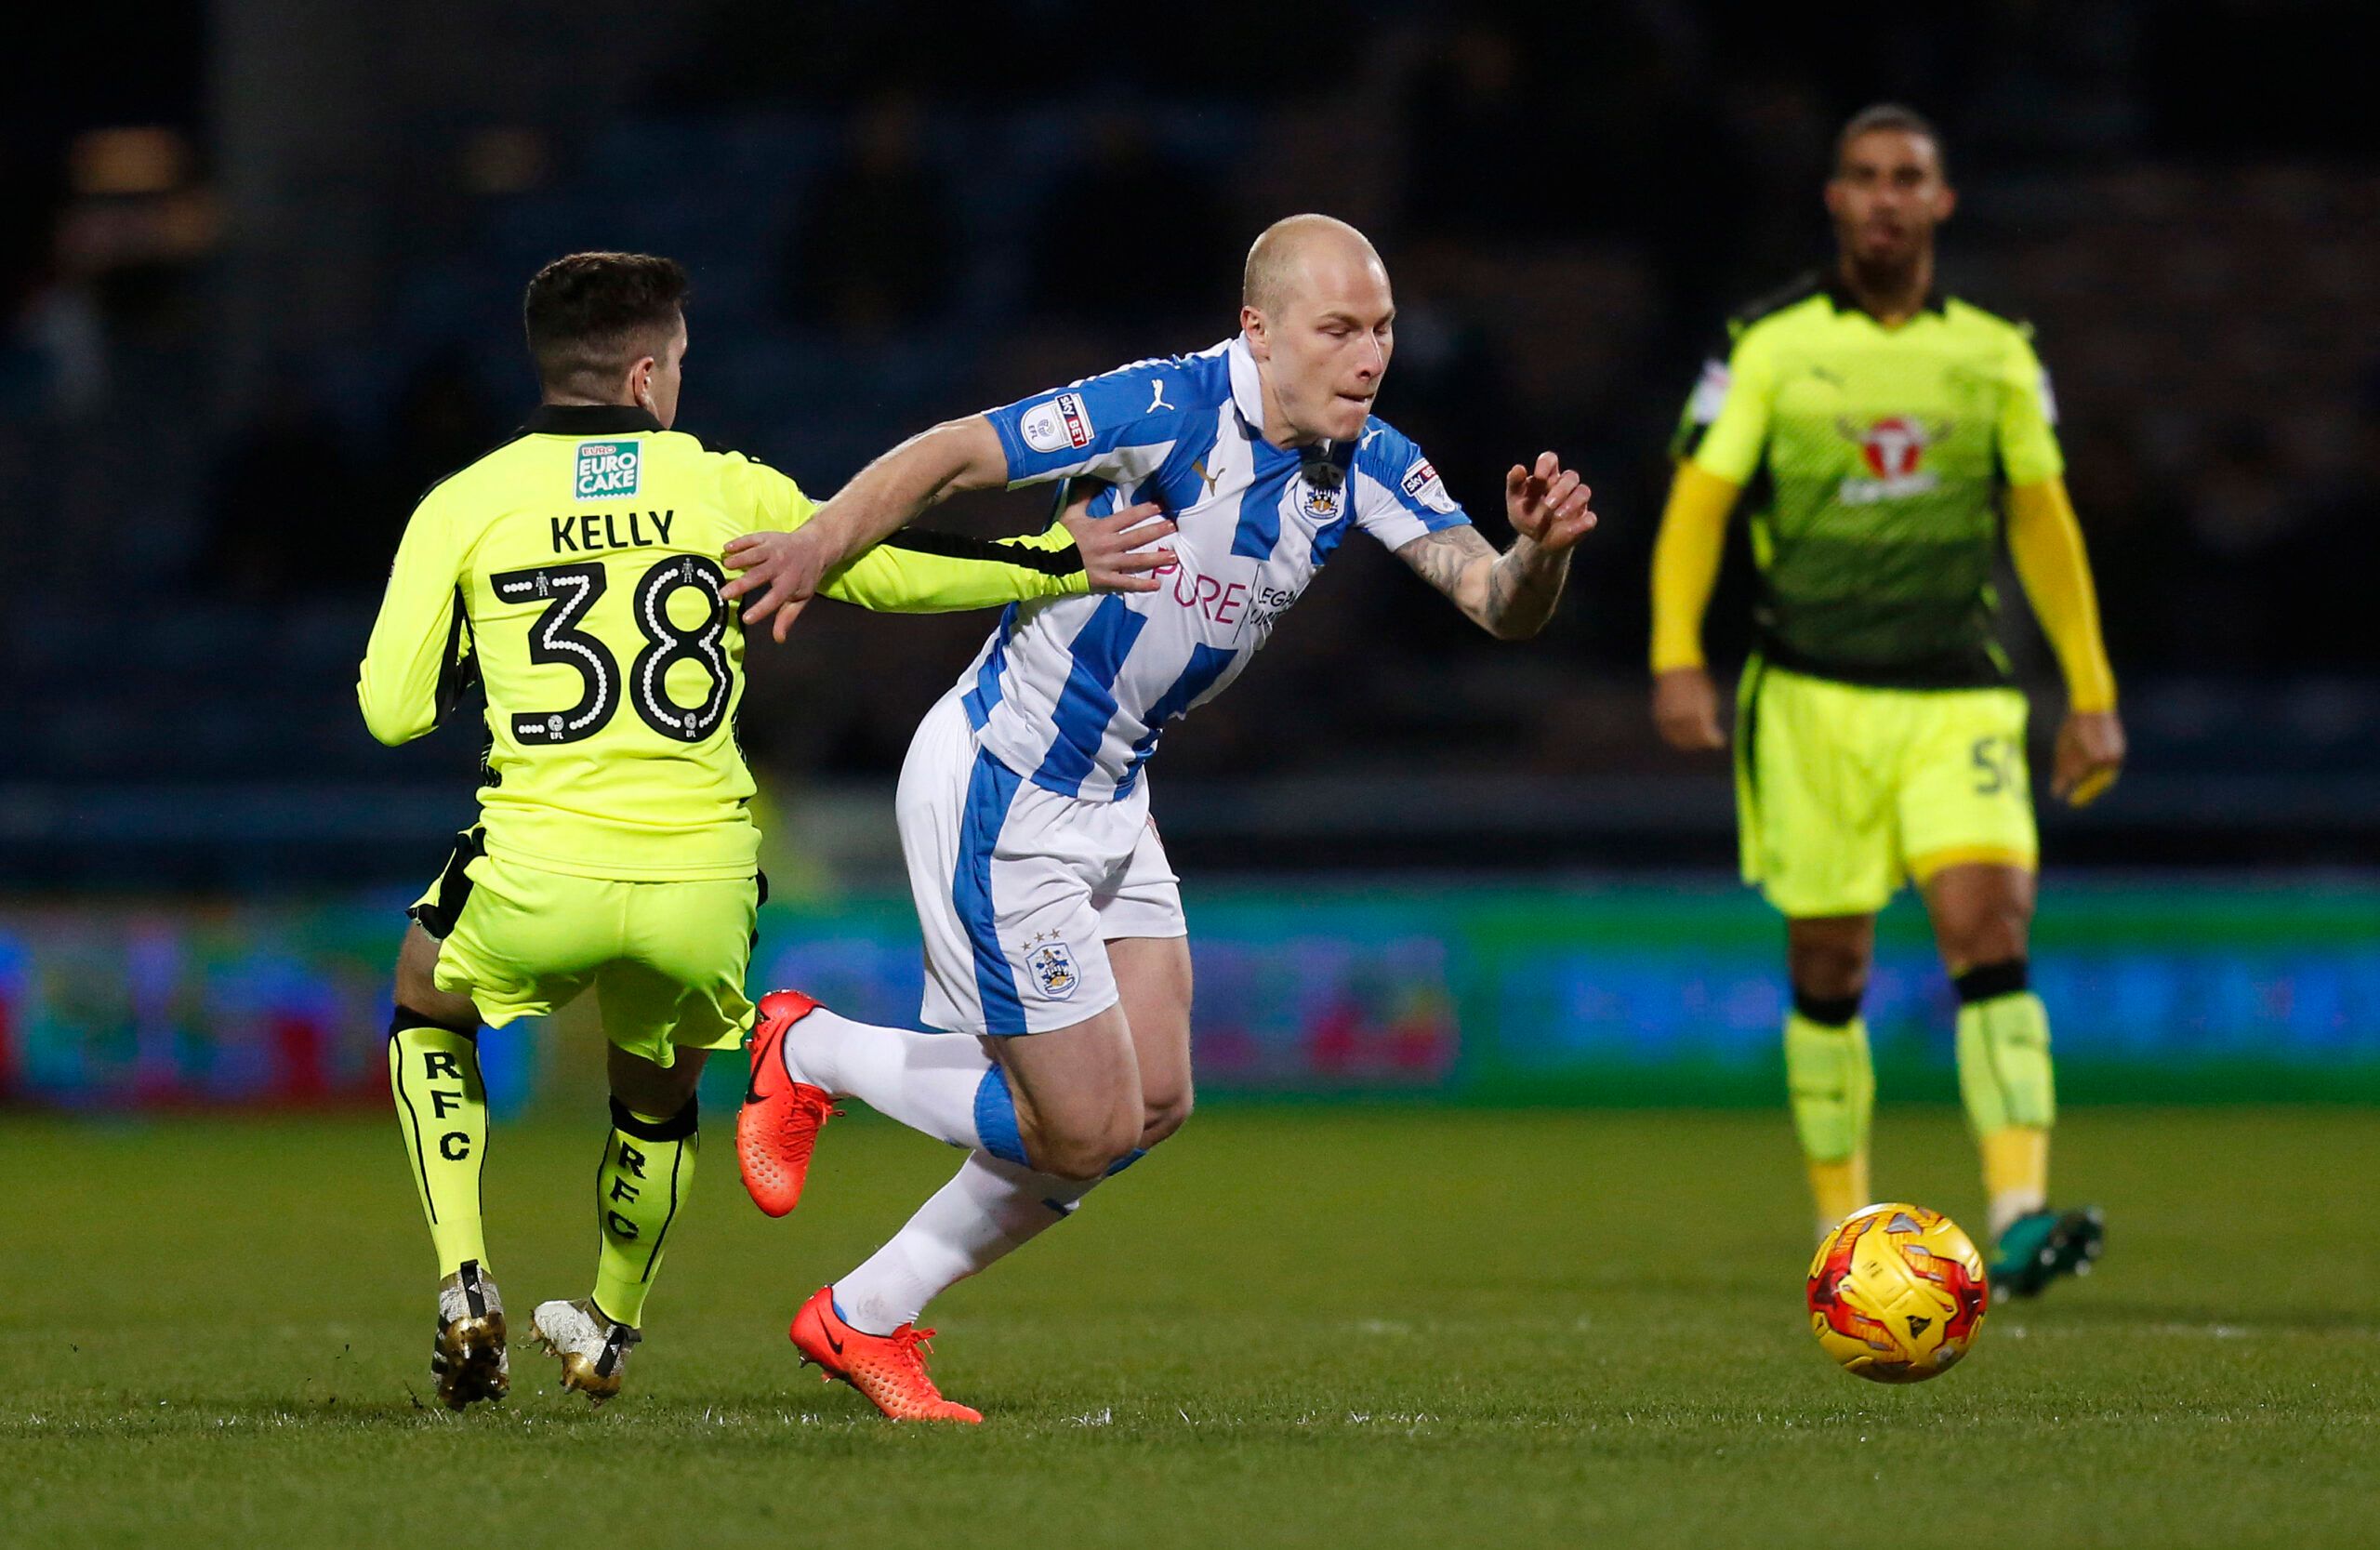 Britain Football Soccer - Huddersfield Town v Reading - Sky Bet Championship - The John Smith's Stadium - 21/2/17 Aaron Mooy of Huddersfield Town in action Mandatory Credit: Action Images / Ed Sykes Livepic EDITORIAL USE ONLY. No use with unauthorized audio, video, data, fixture lists, club/league logos or 